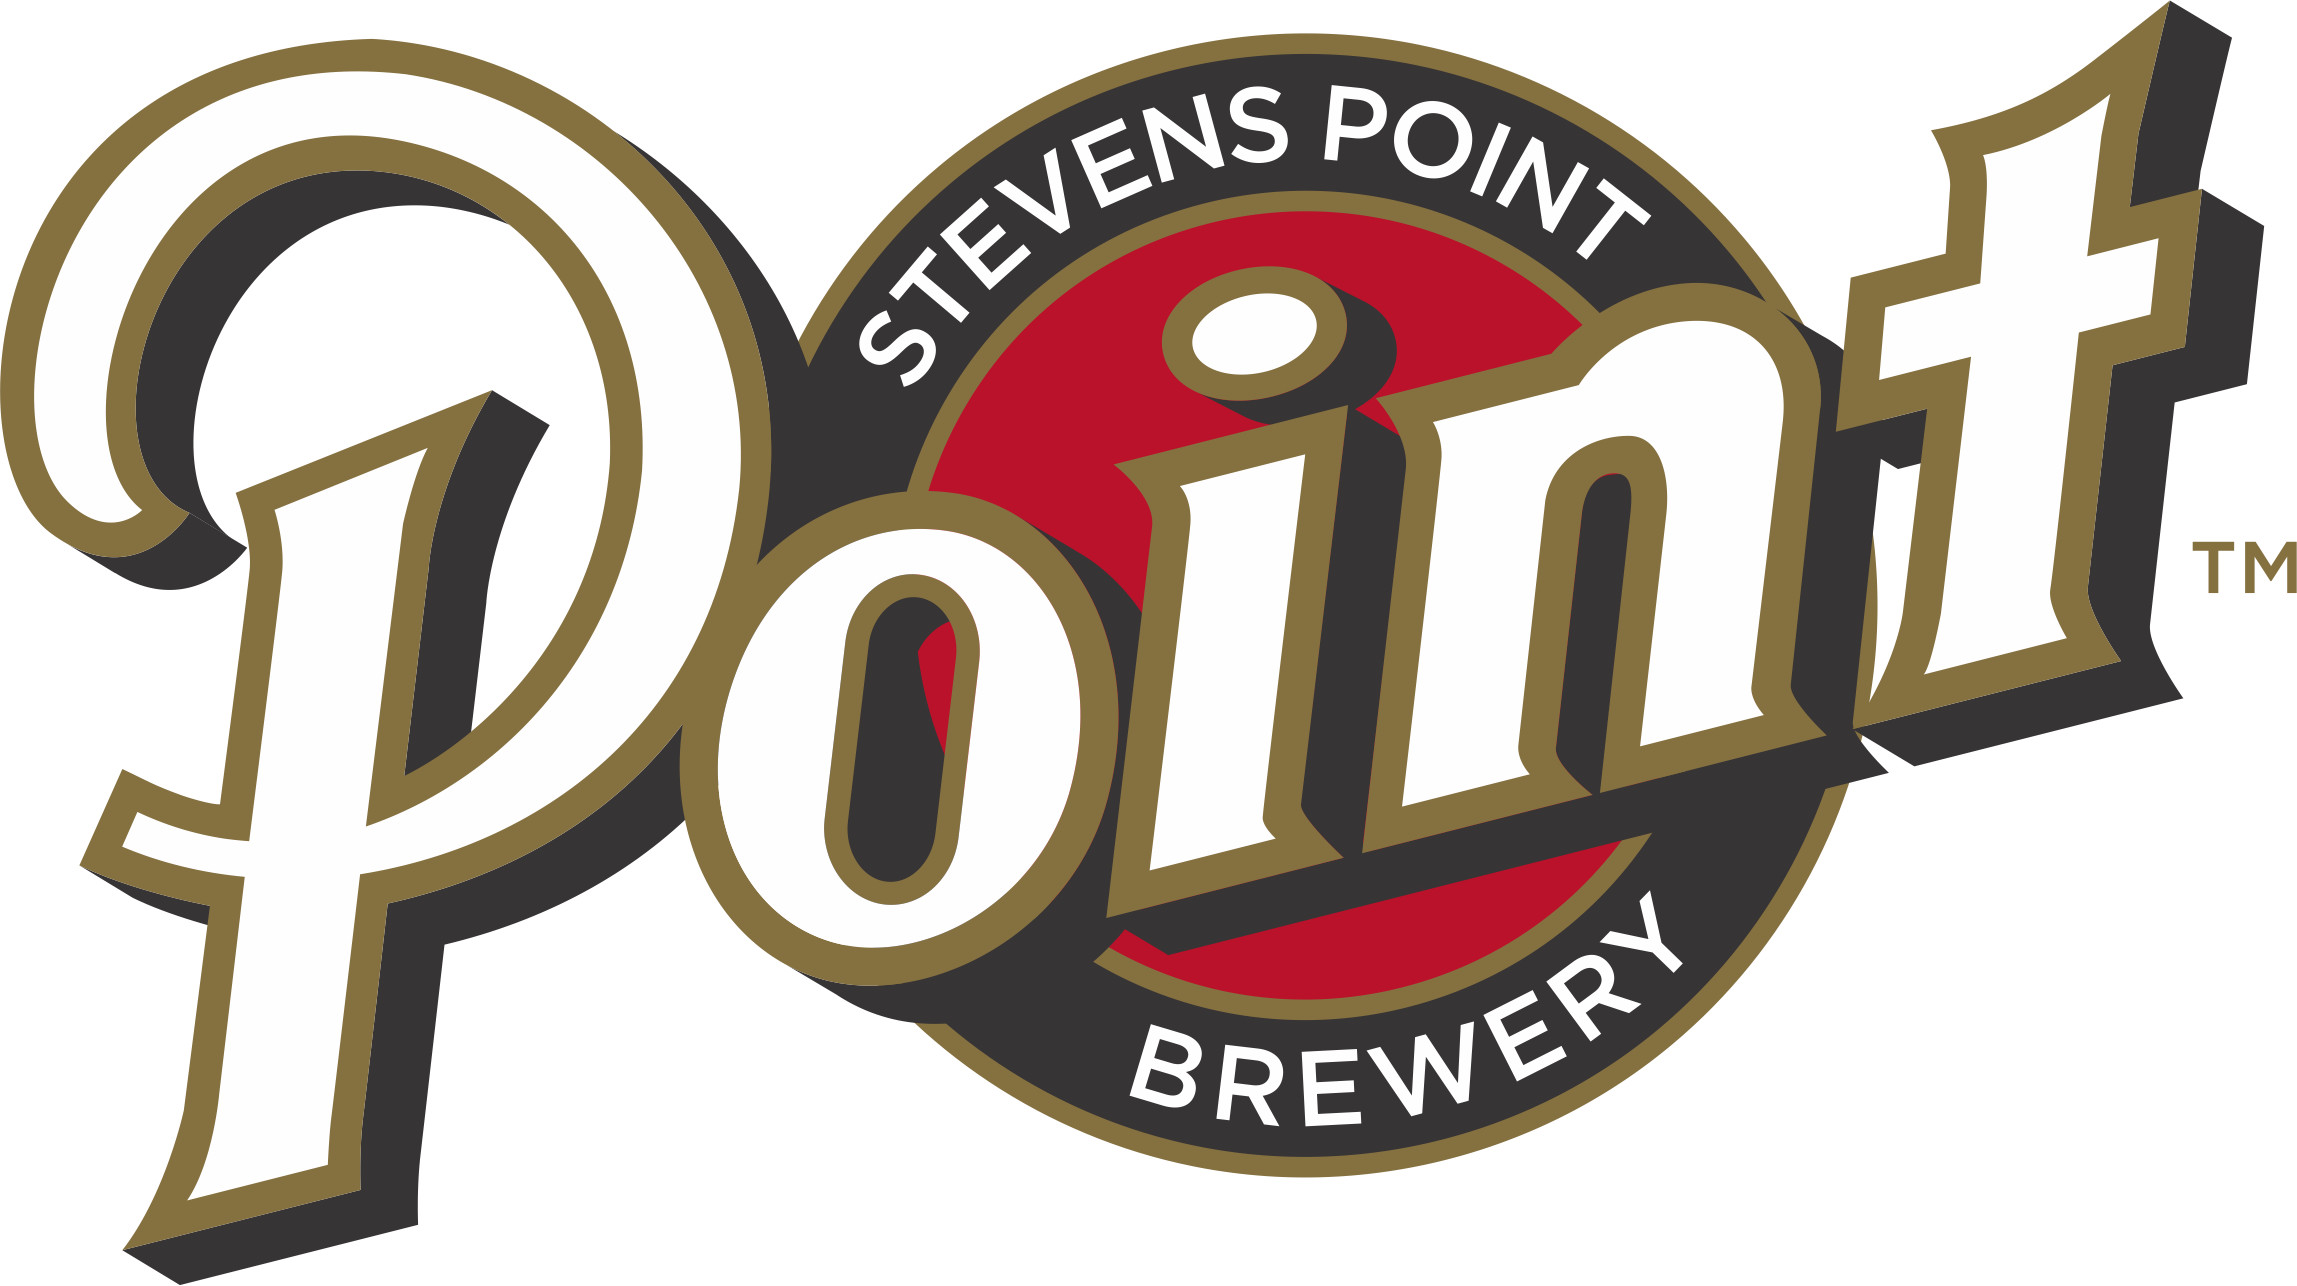 Point Brewery